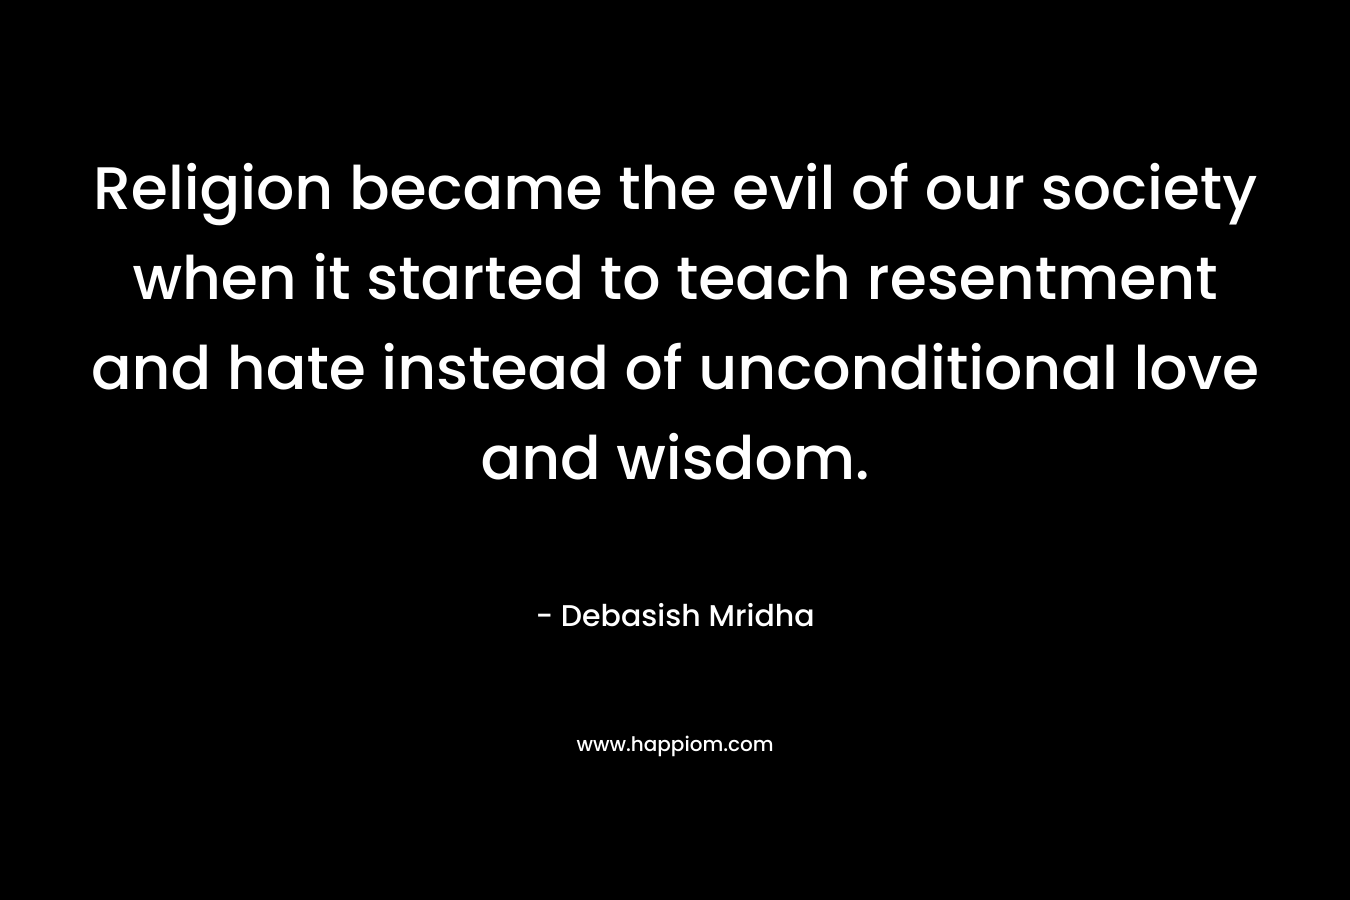 Religion became the evil of our society when it started to teach resentment and hate instead of unconditional love and wisdom.